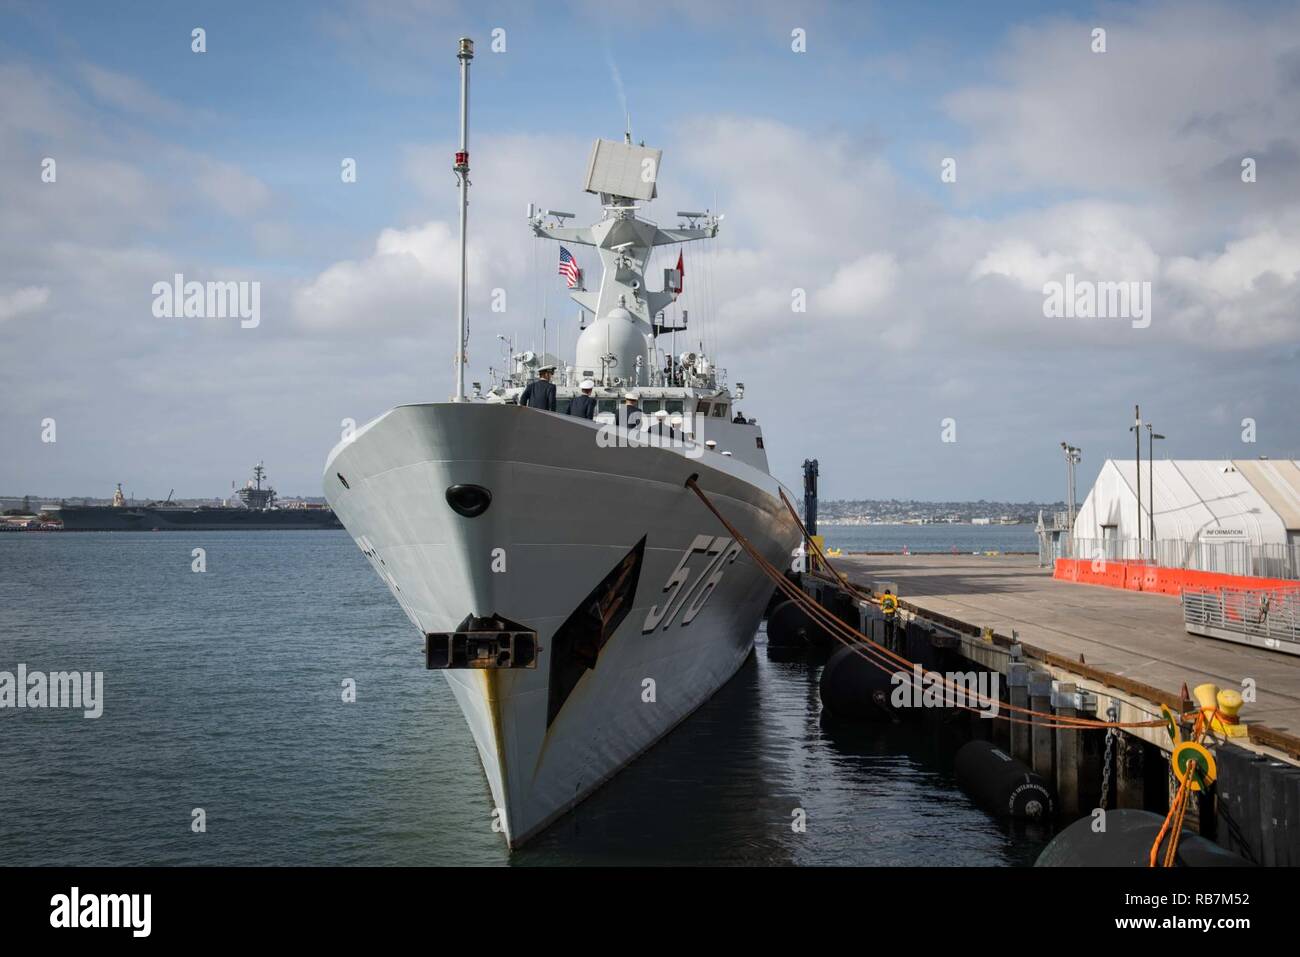 SAN DIEGO (Dec. 6, 2016) The Jiangkai II-class frigate Daqing (FFG 576) arrives in San Diego for routine port visit. Rear Adm. Jay Bynum, commander of Carrier Strike Group Nine, is hosting three People’s Liberation Army (Navy) ships during a routine port visit in San Diego. Stock Photo